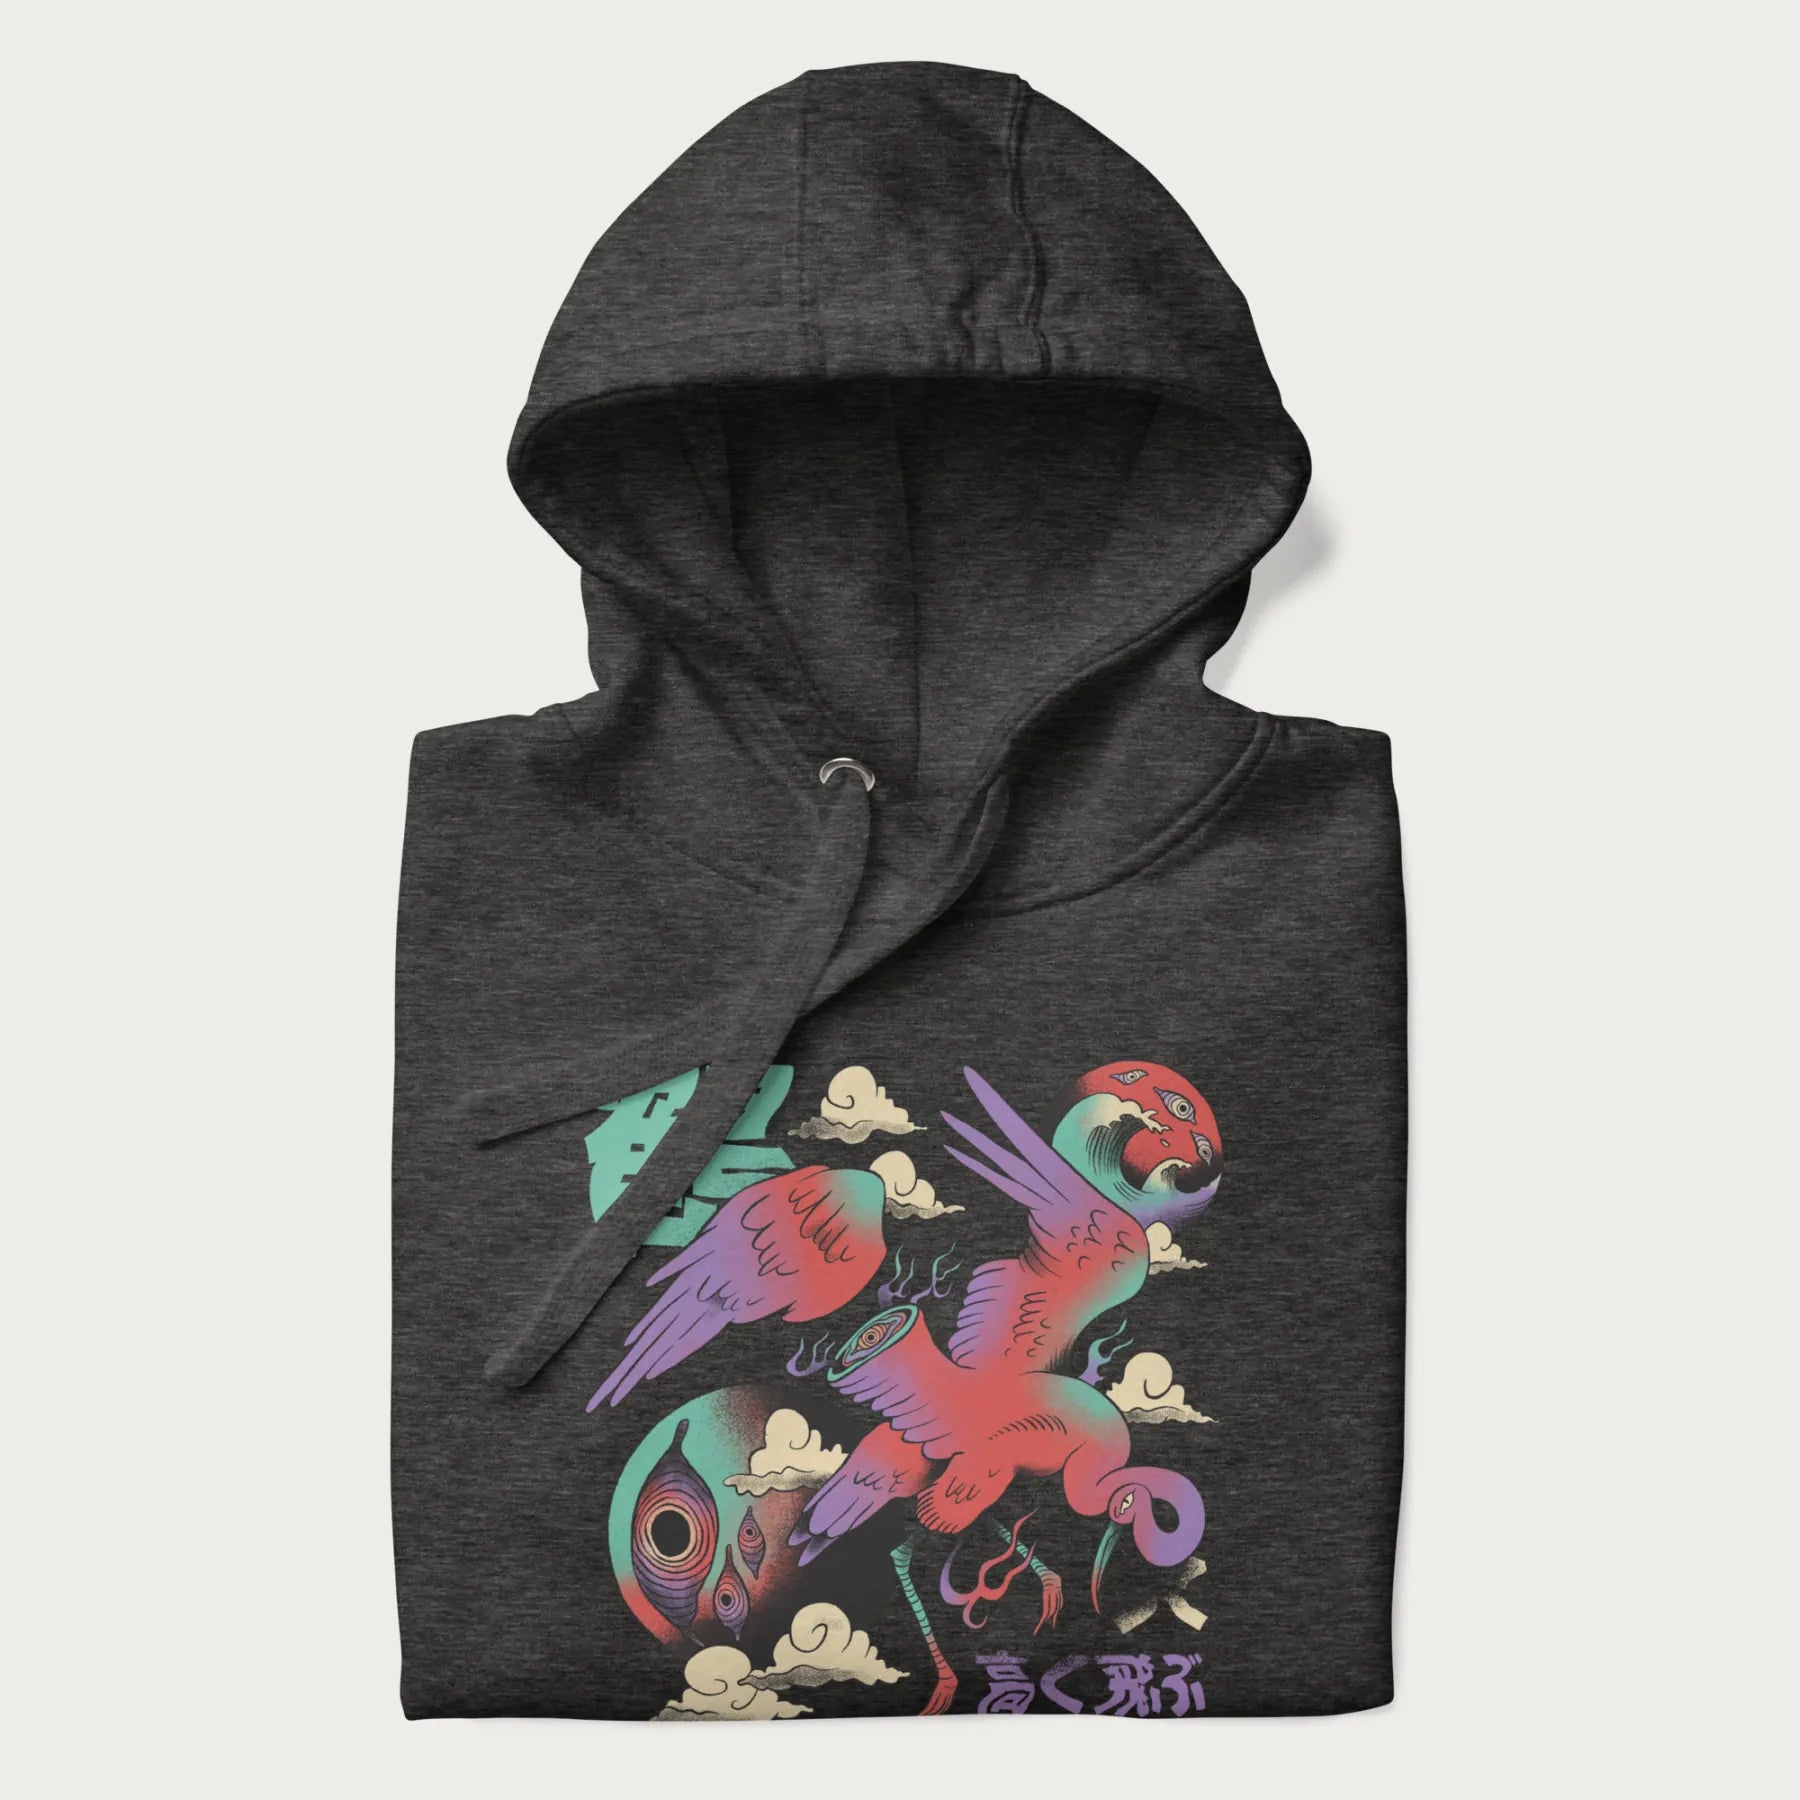 Folded dark grey hoodie with Japanese crane graphic in vibrant colors and Japanese text '鶴' (Crane) and '高く飛ぶ' (Fly High).